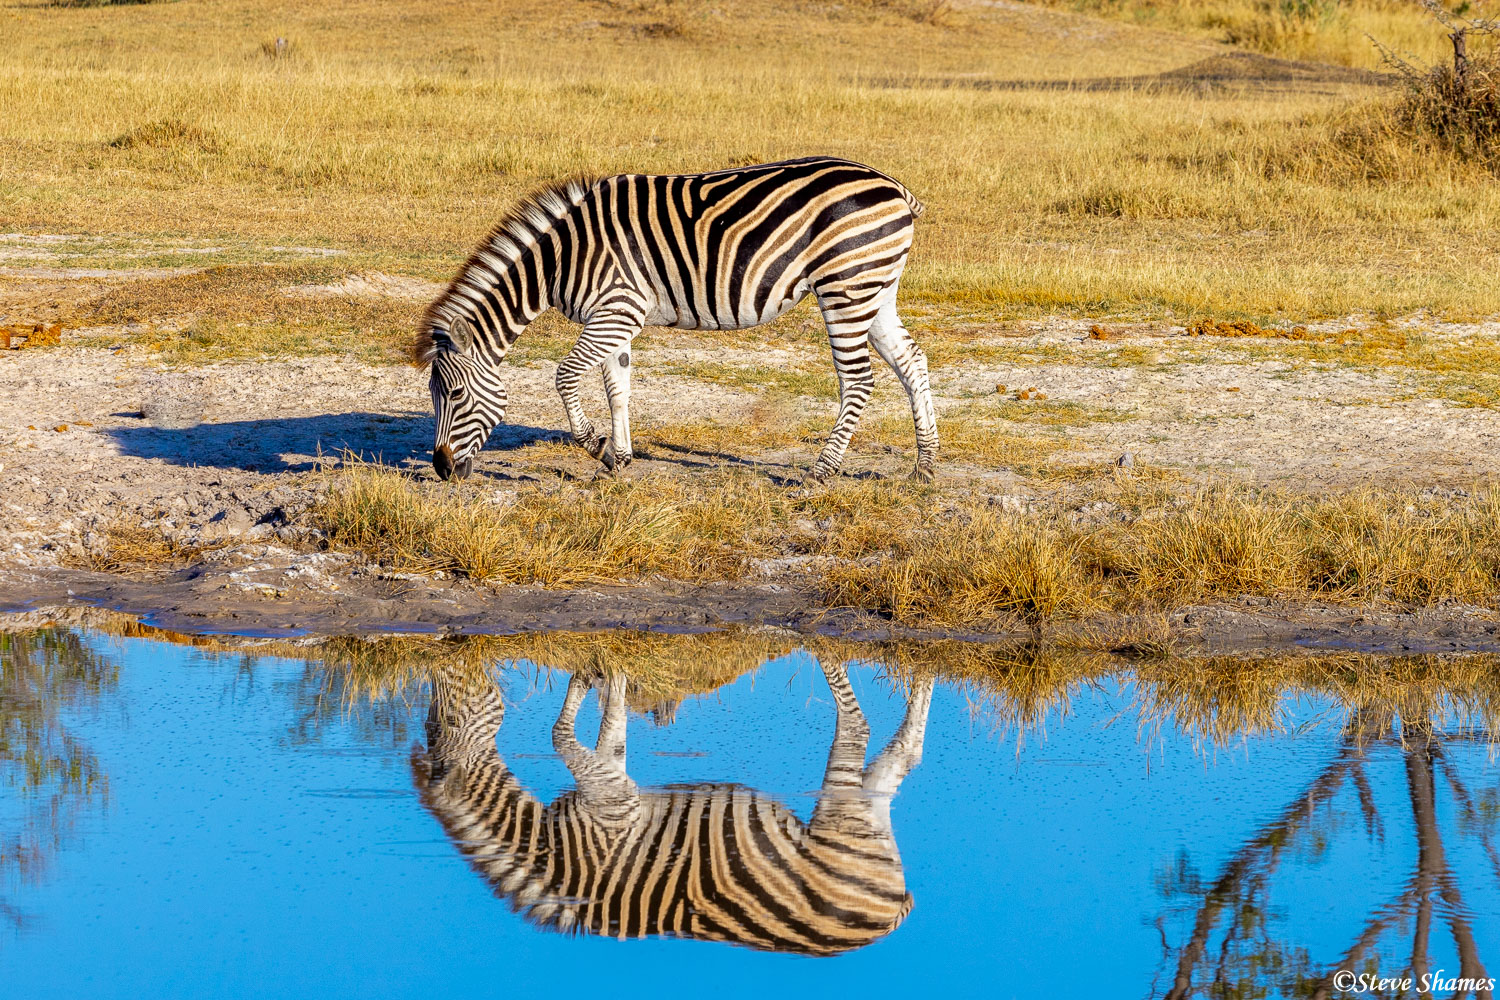 We were lined up just right to get a great reflection from this Zebra in Botswana!